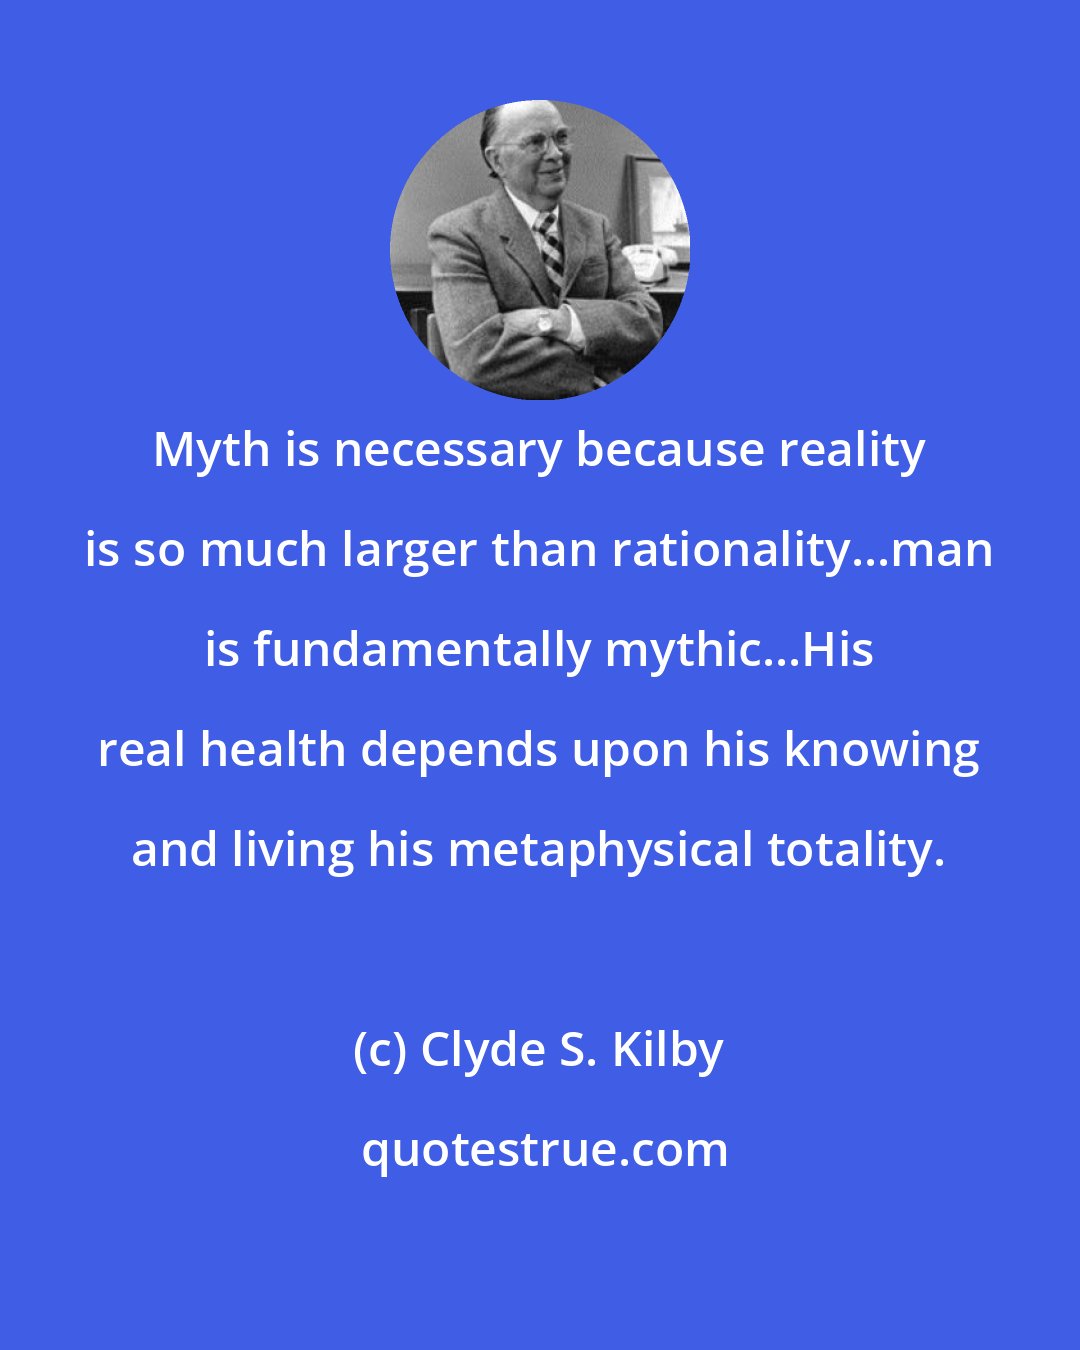 Clyde S. Kilby: Myth is necessary because reality is so much larger than rationality...man is fundamentally mythic...His real health depends upon his knowing and living his metaphysical totality.